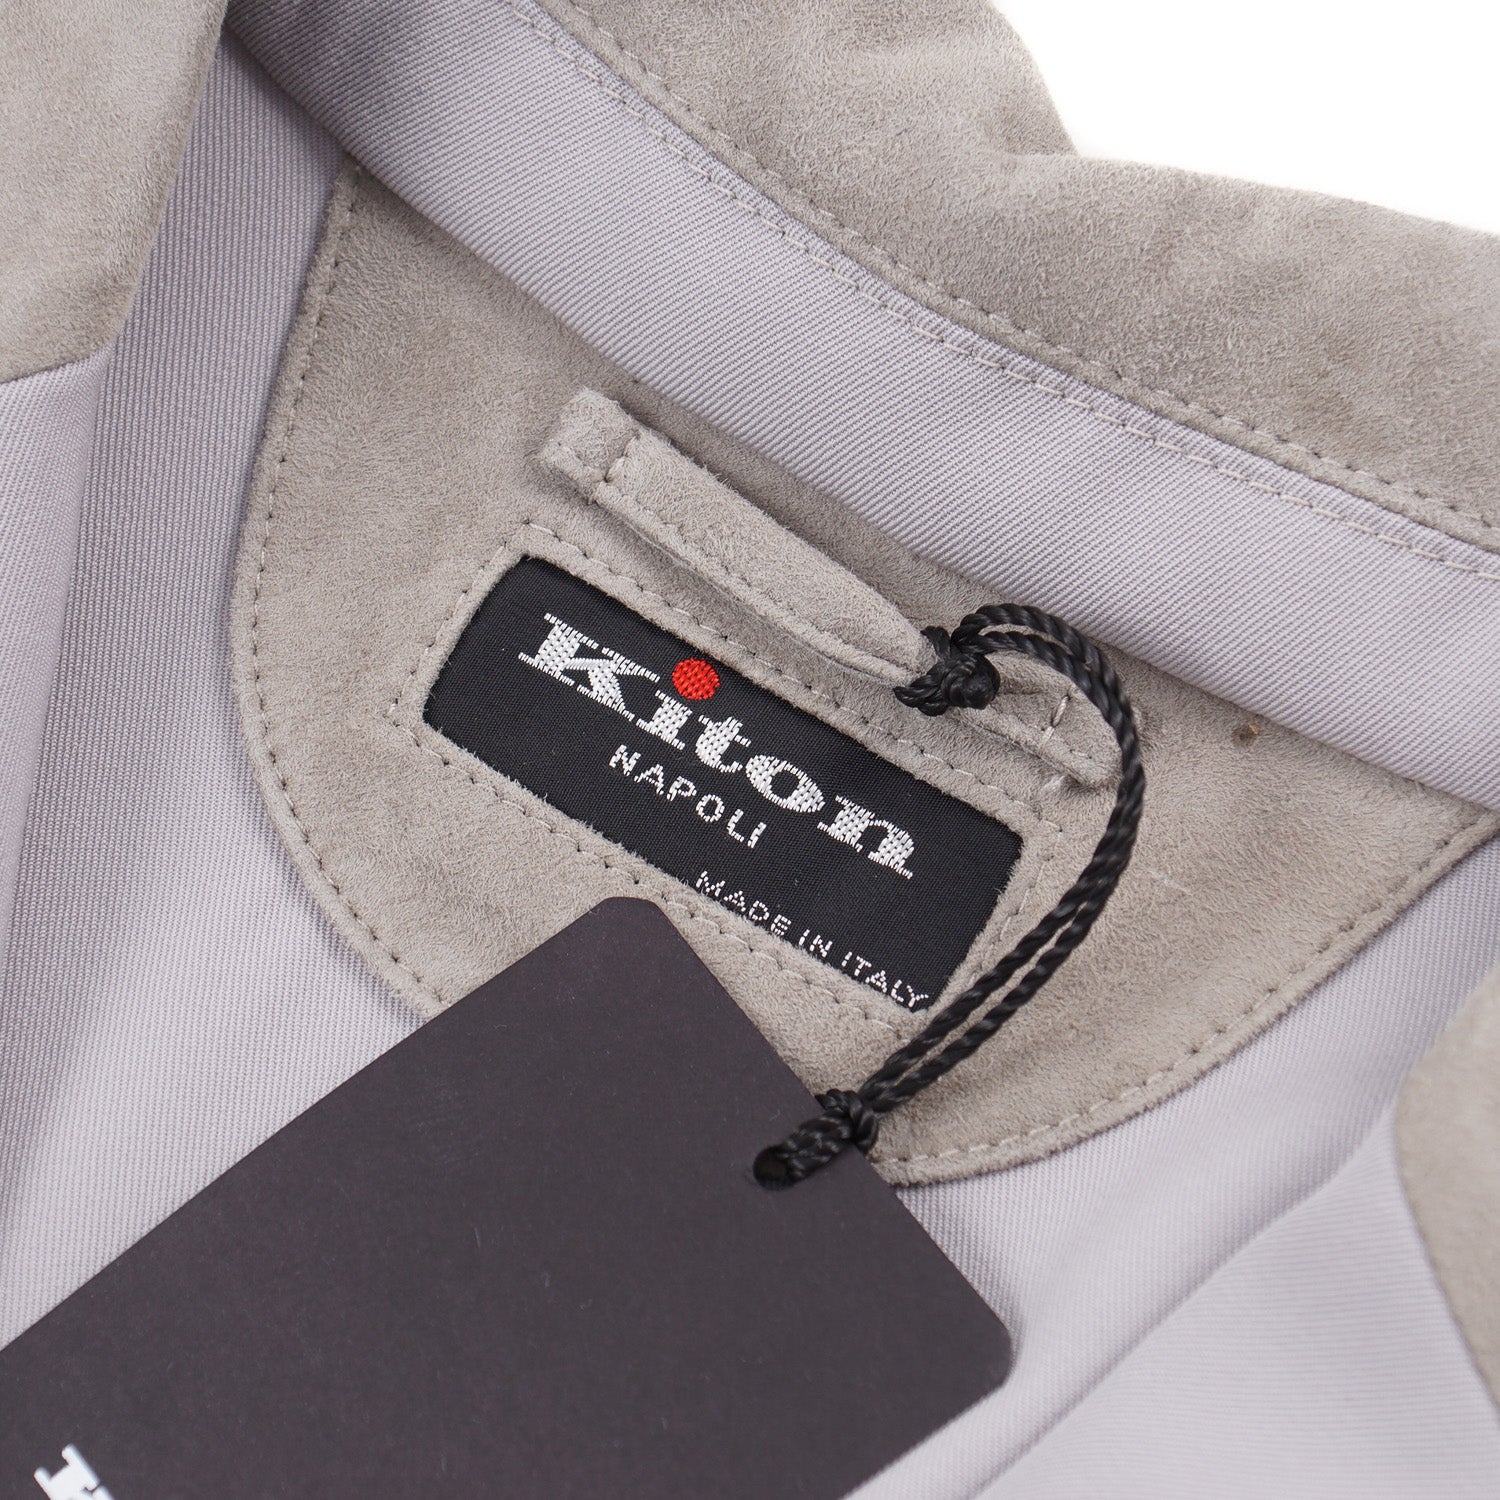 Kiton Lightweight Wool Jacket with Suede Details - Top Shelf Apparel